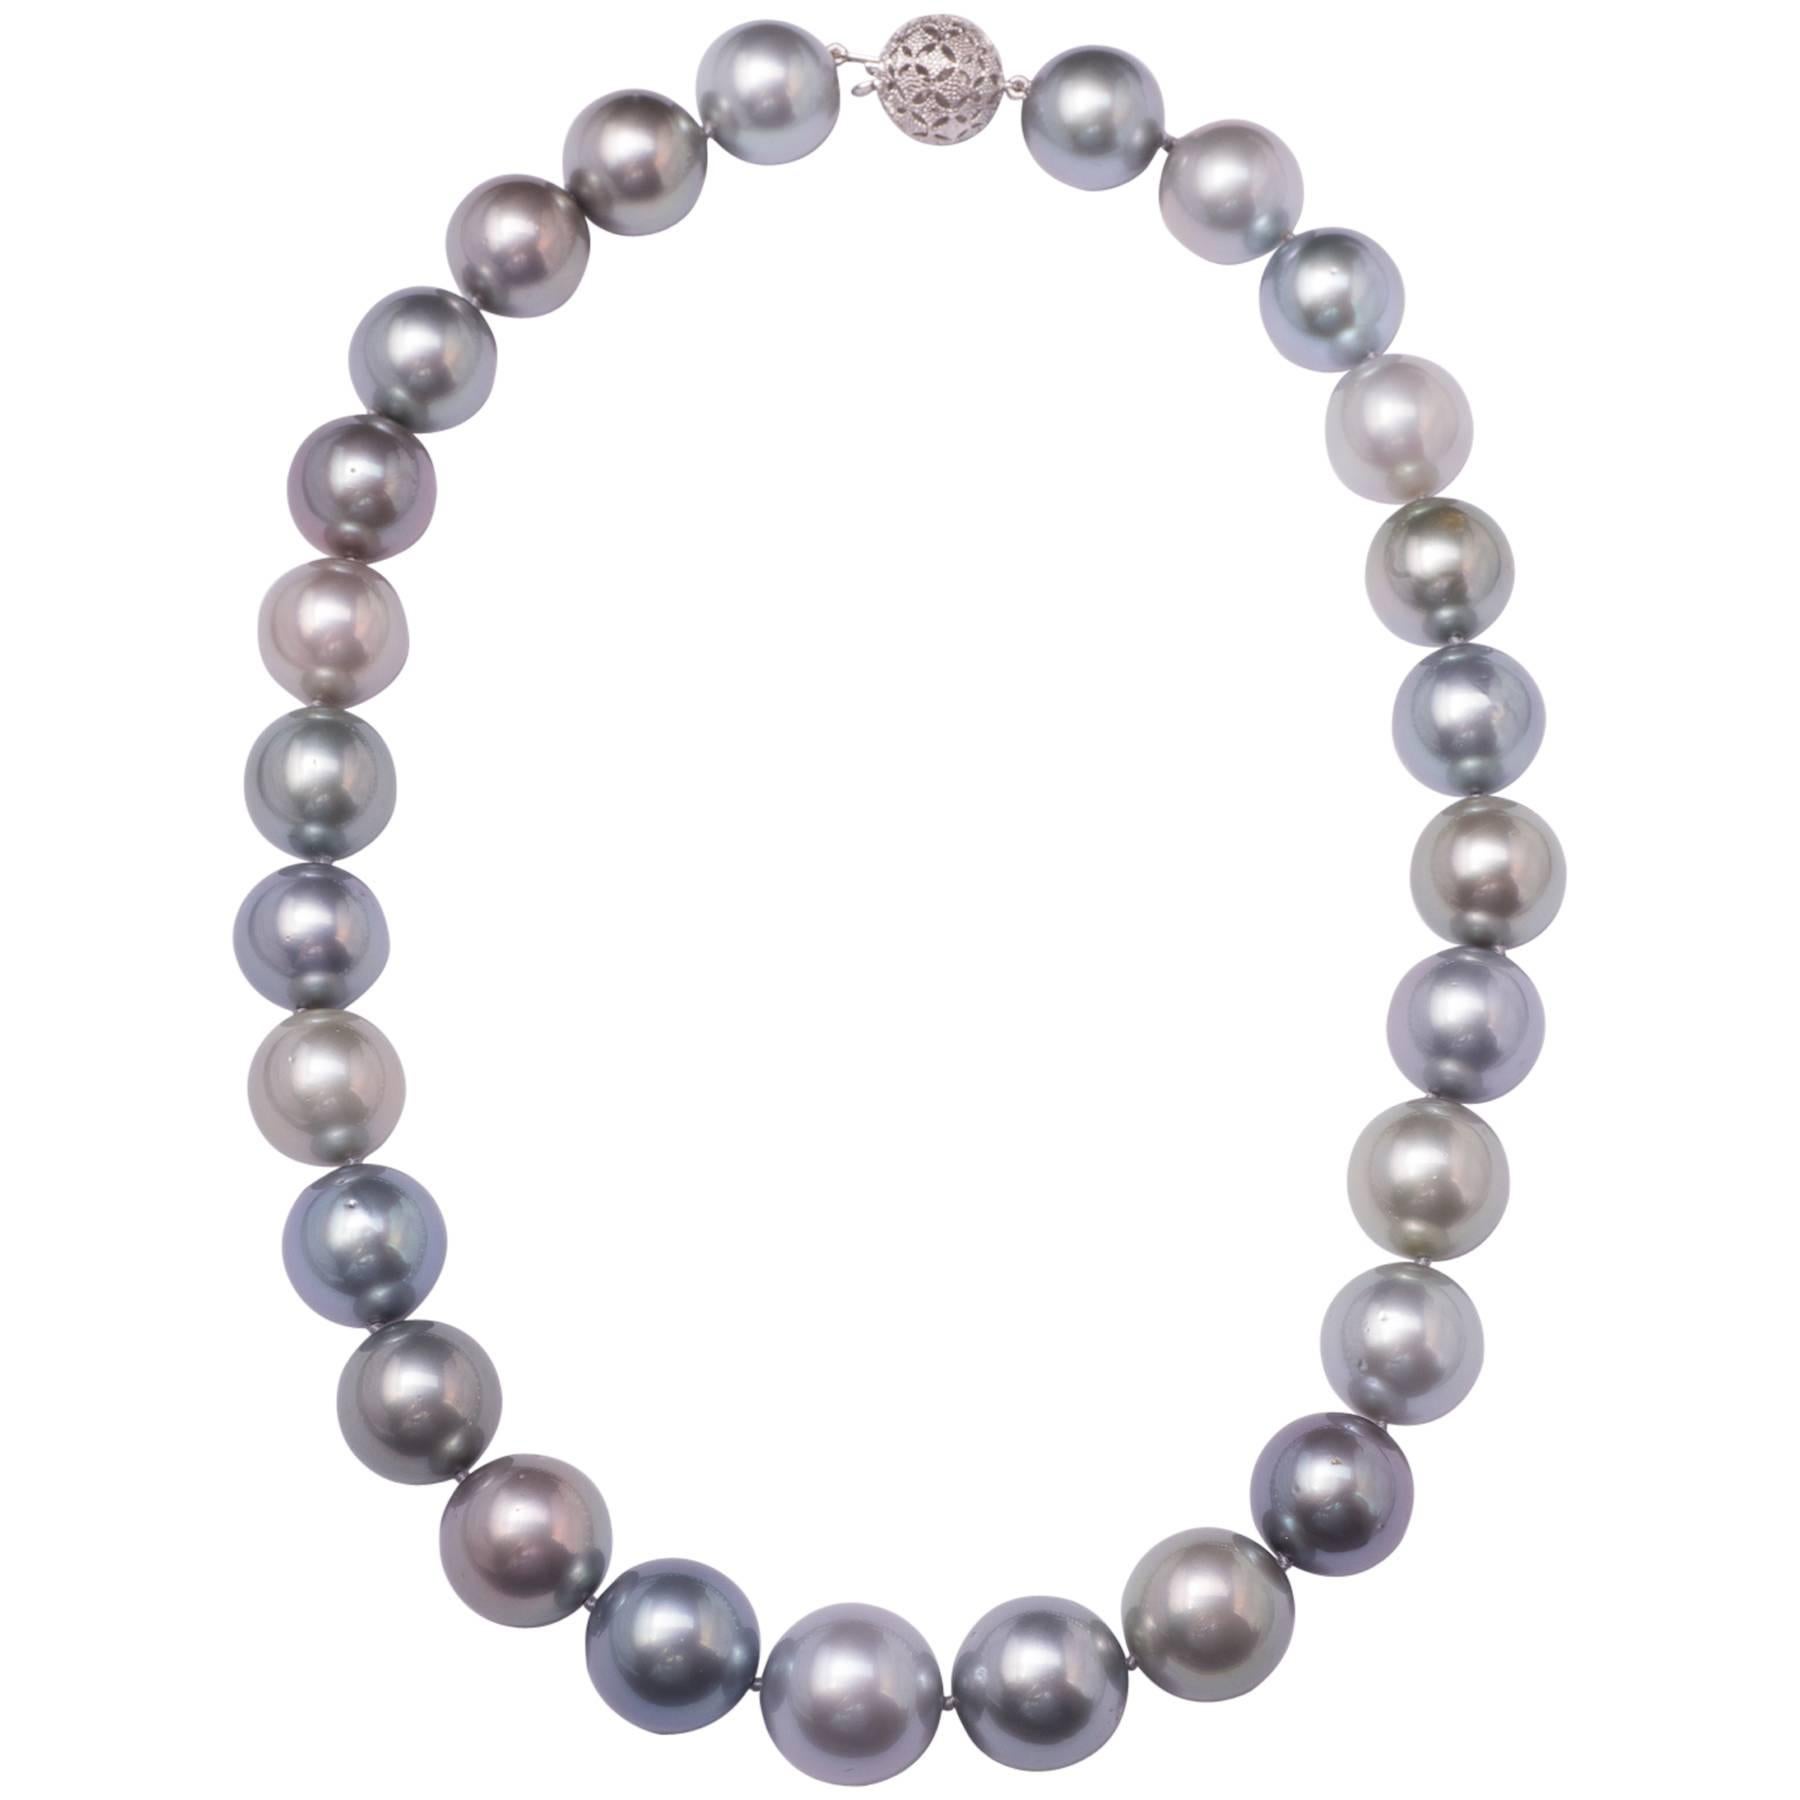 Magnificent Very Large Tahitian Multicolored South Sea Pearl Necklace